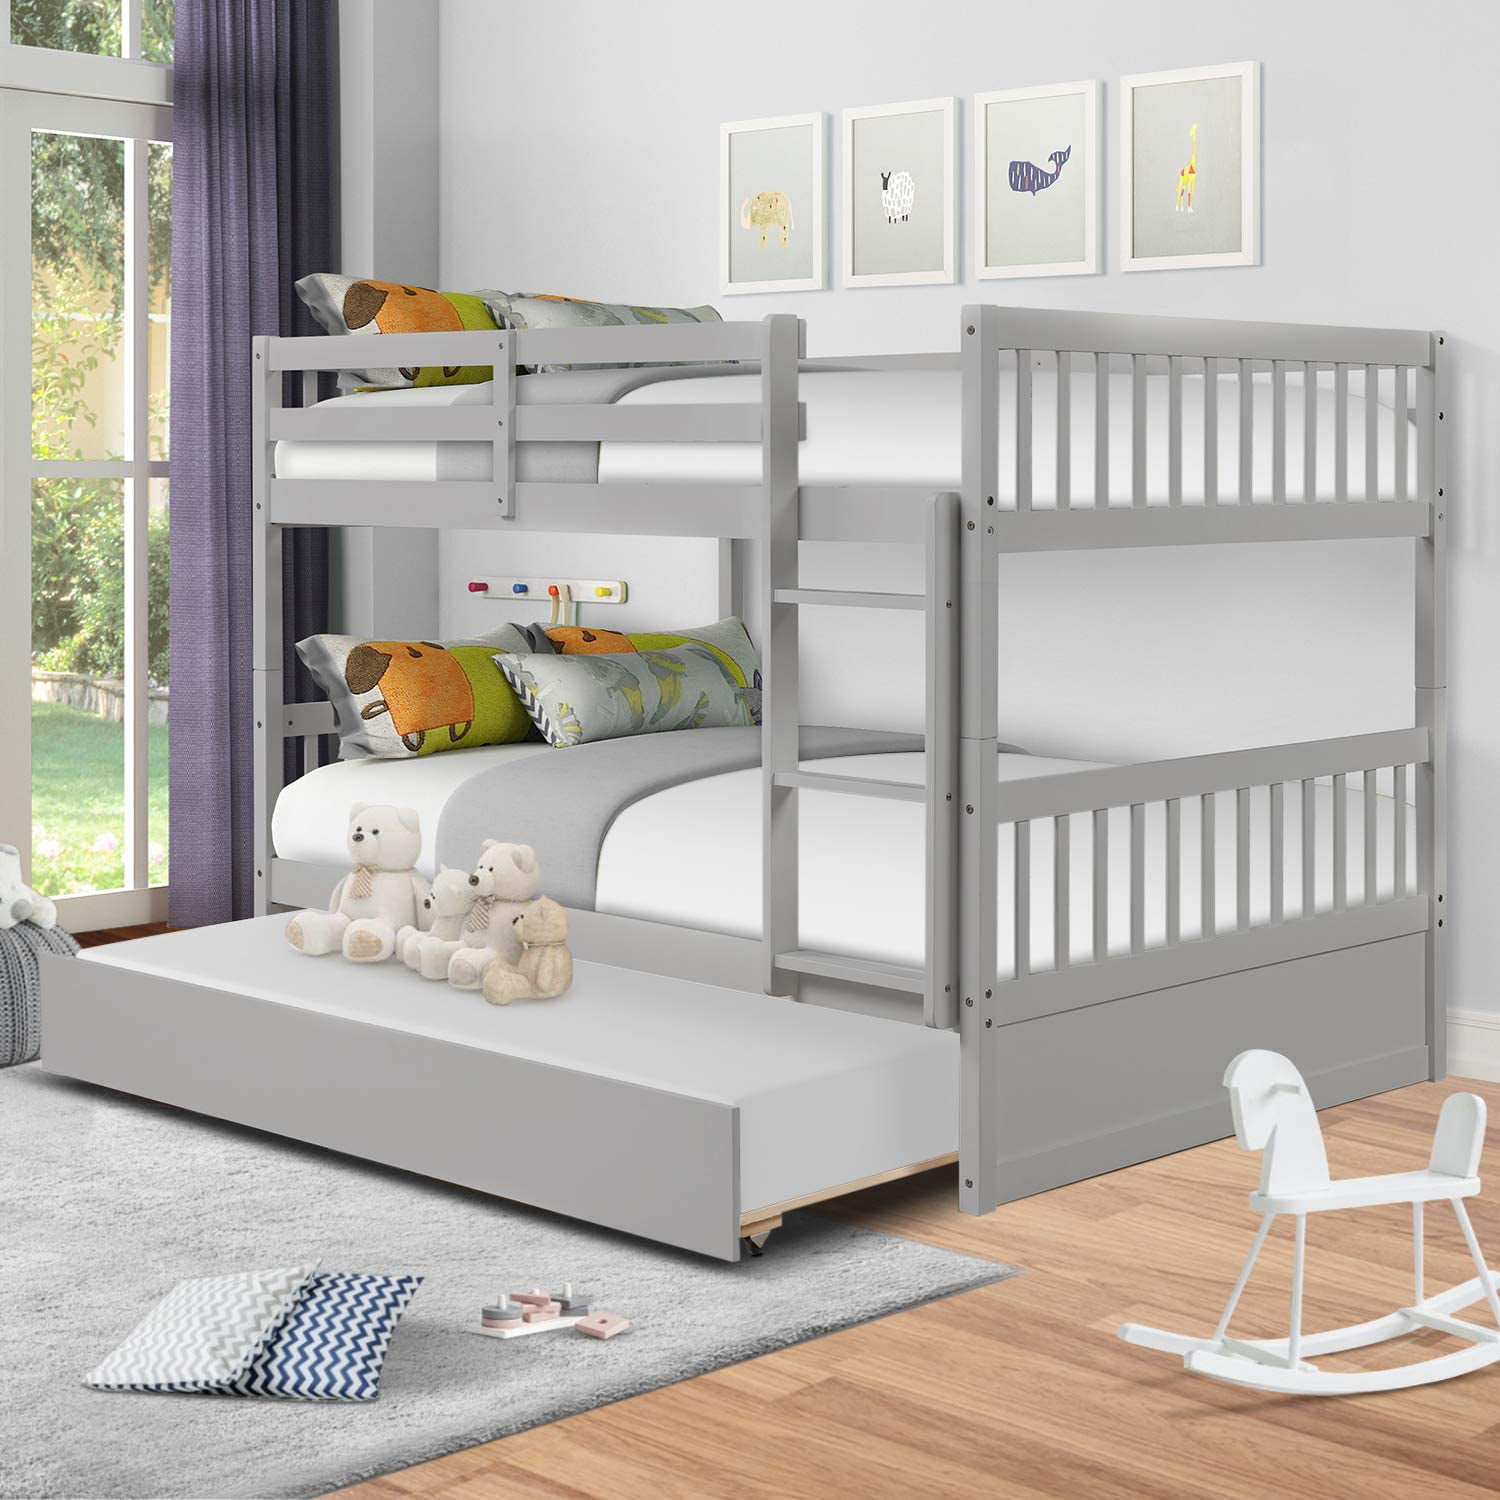 Trundle Pine Wood Bunk Beds, Can You Paint Over A Bunk Beds